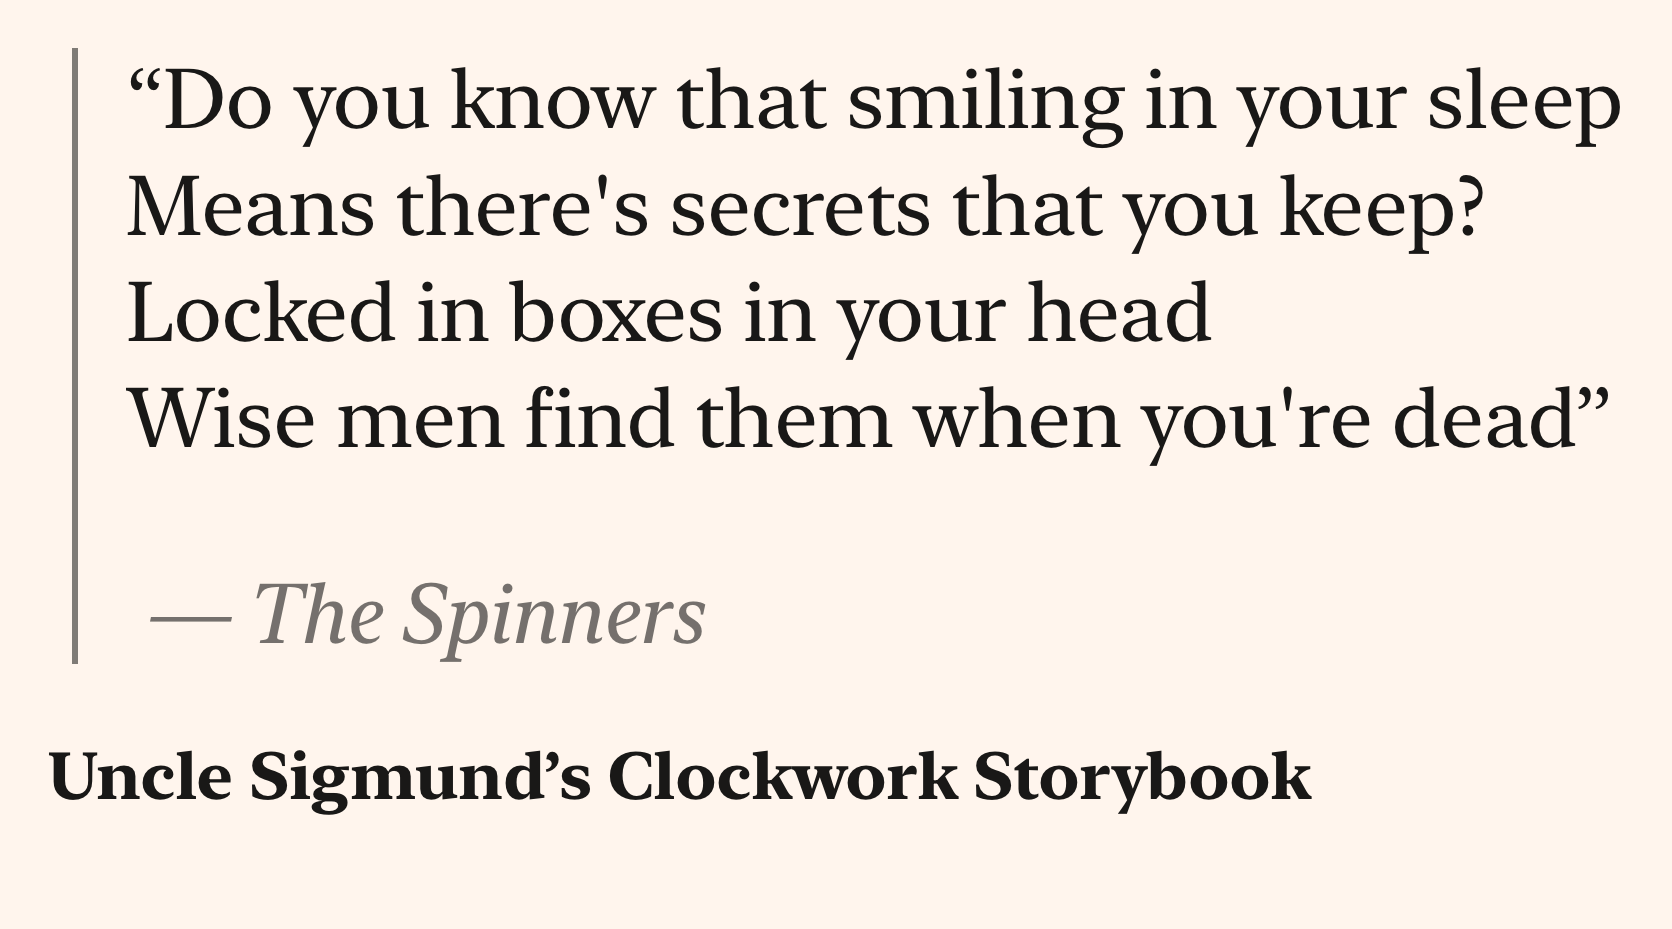 Text from a book or quote, stating: "Do you know that smiling in your sleep means there's secrets that you keep? Locked in boxes in your head. Wise men find them when you're dead,” attributed to The Spinners from Uncle S